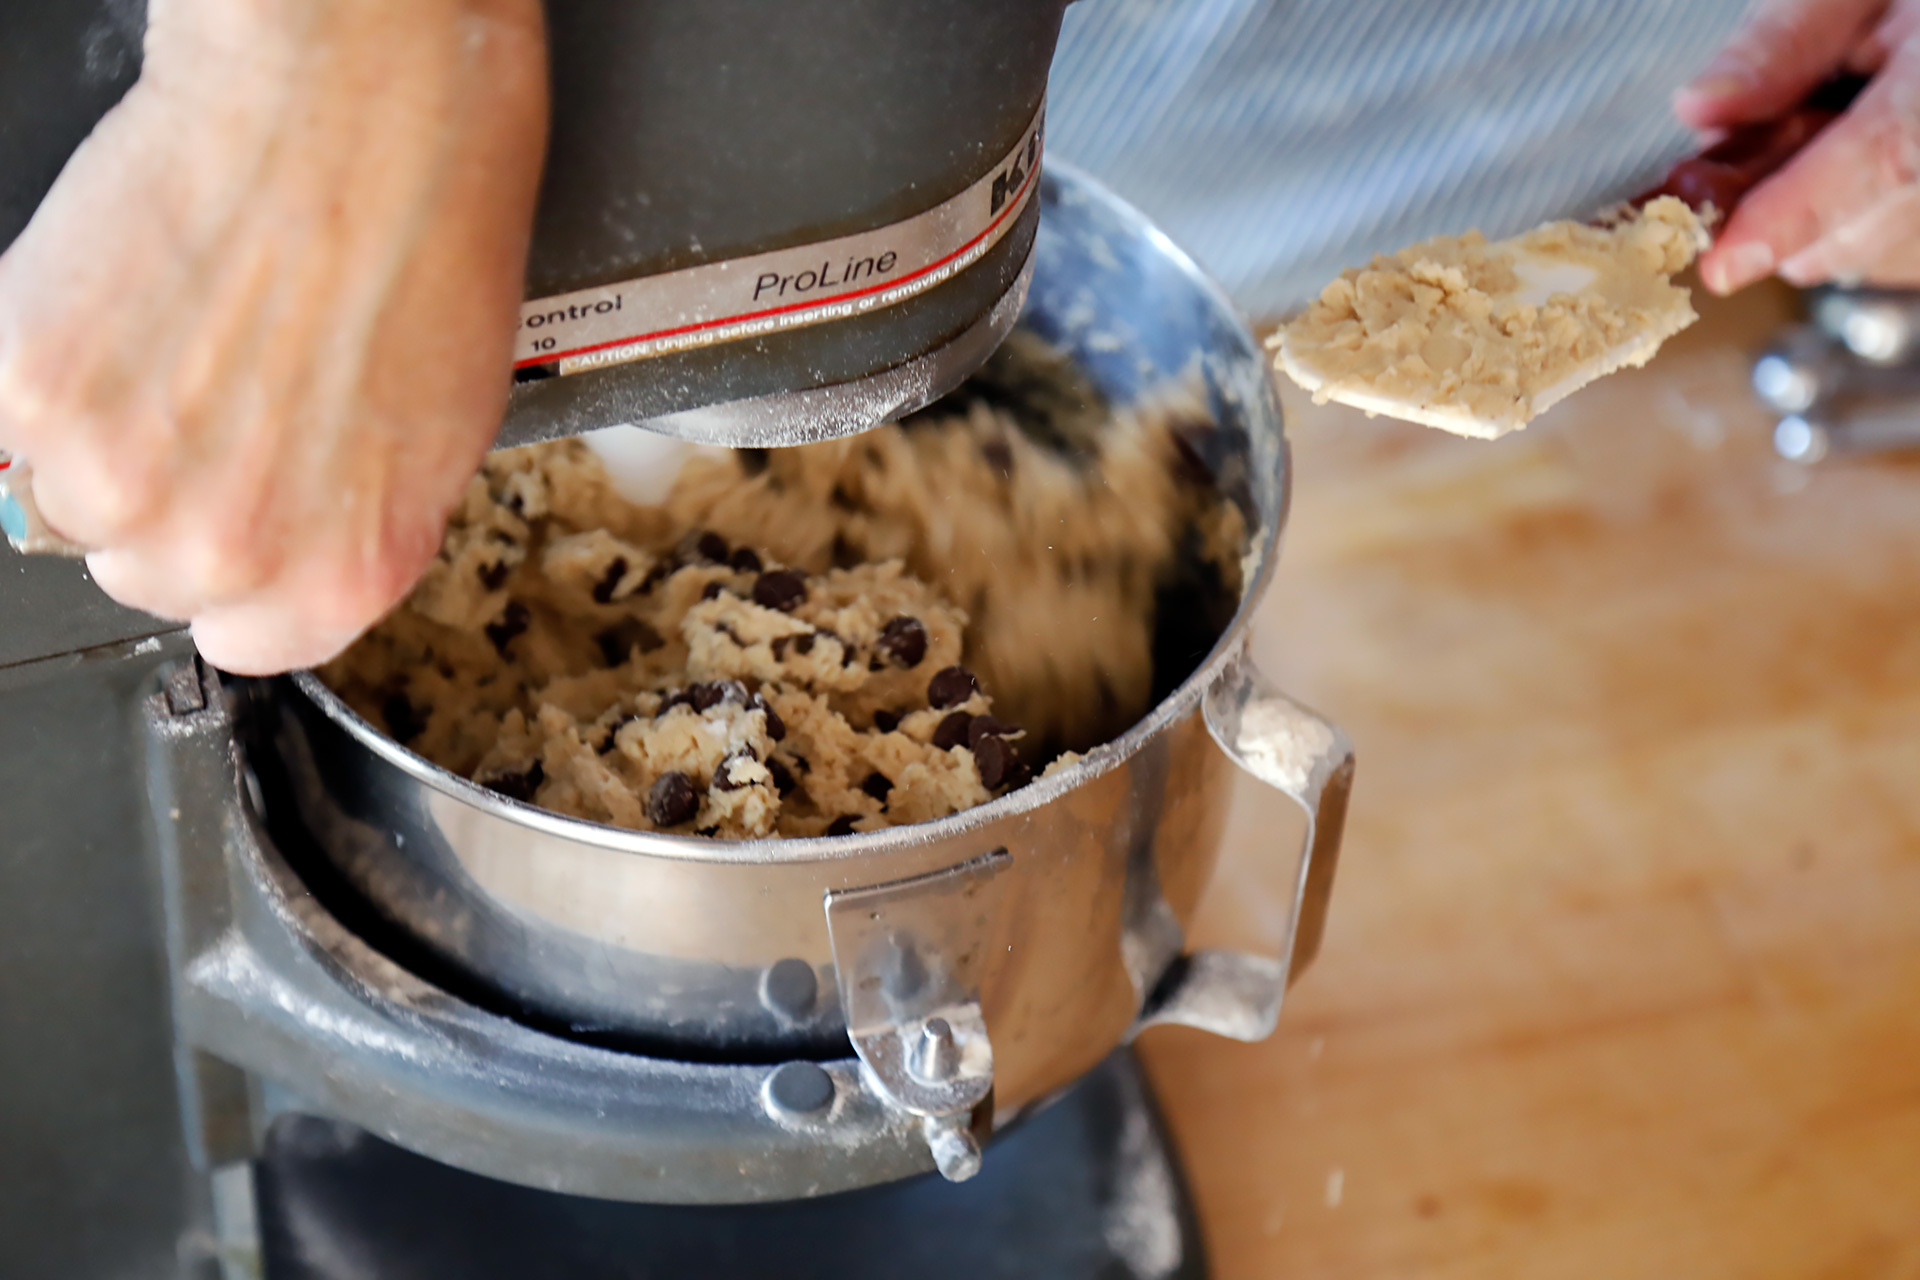 Add the chocolate chips and beat on low until evenly incorporated.